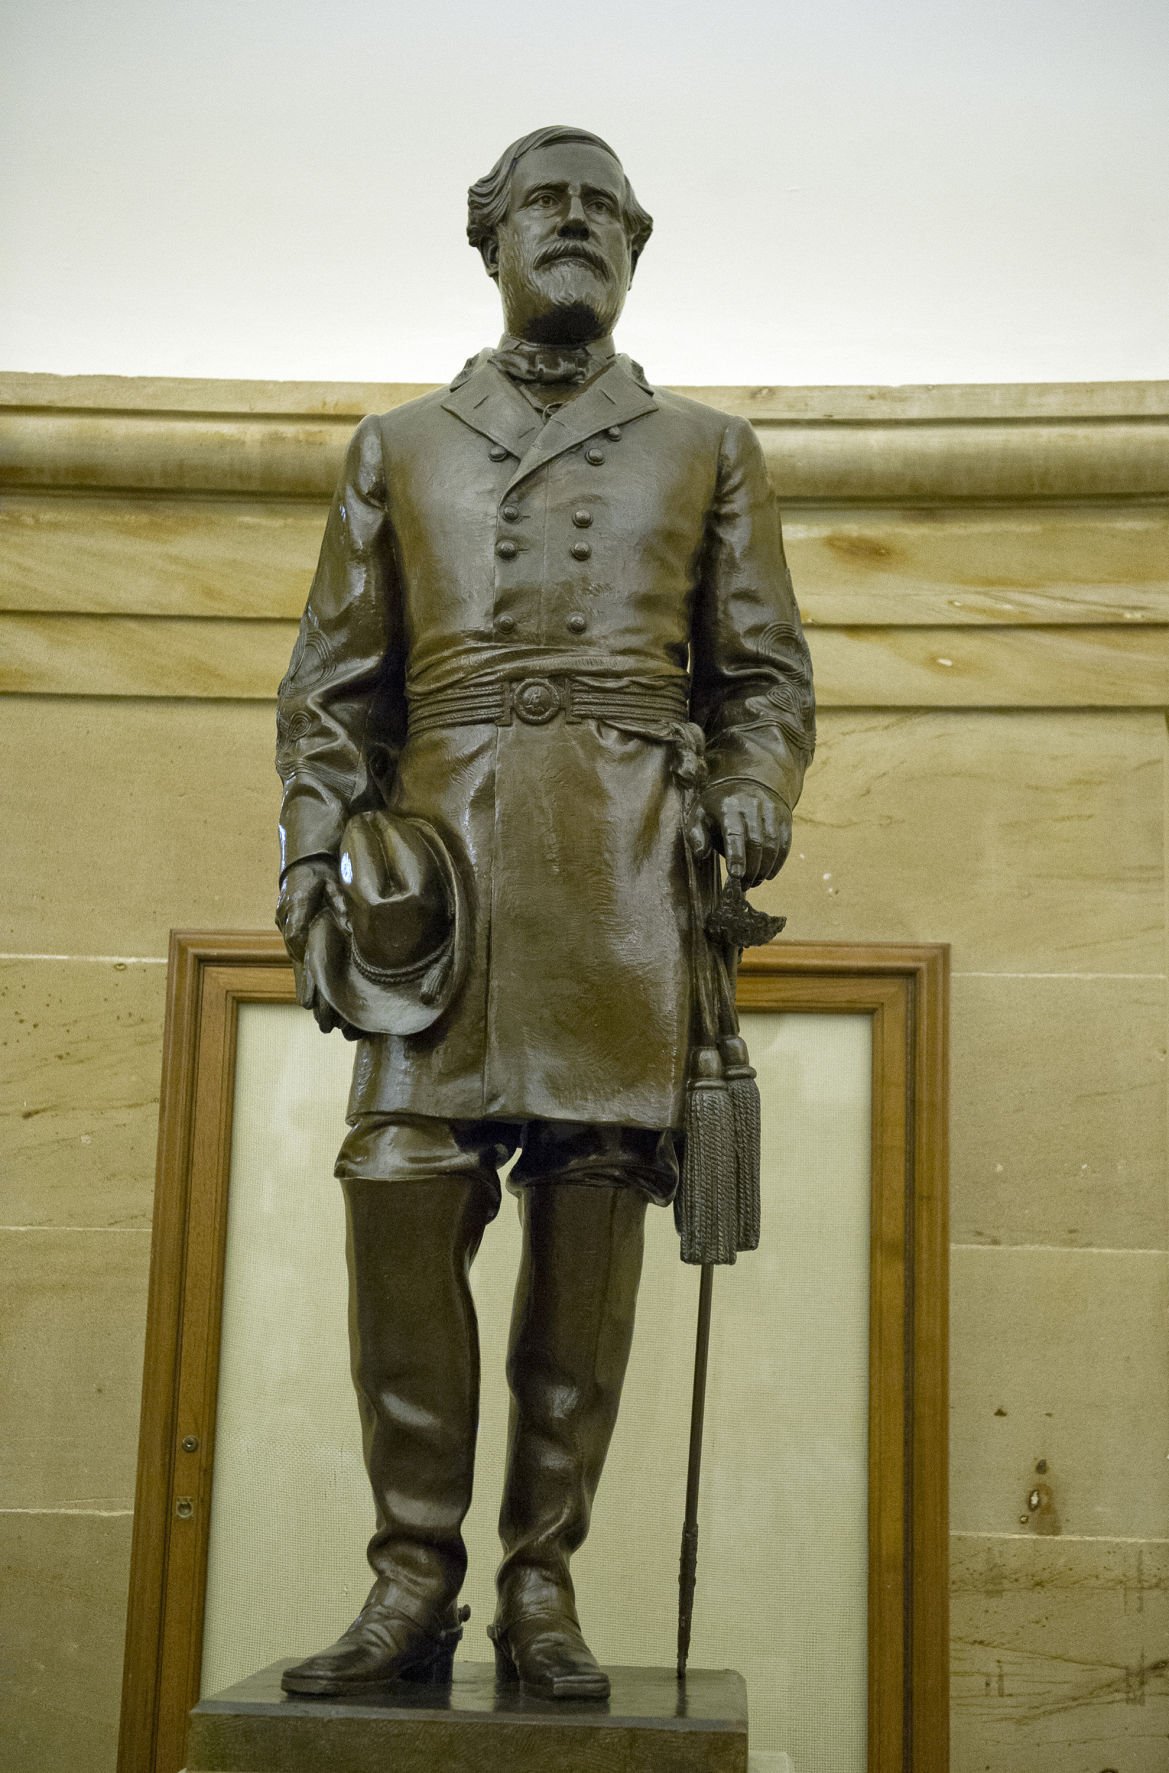 capitol lee statue robert virginia general richmond museum history hall state statuary assembly national gen accept statues bill agrees culture